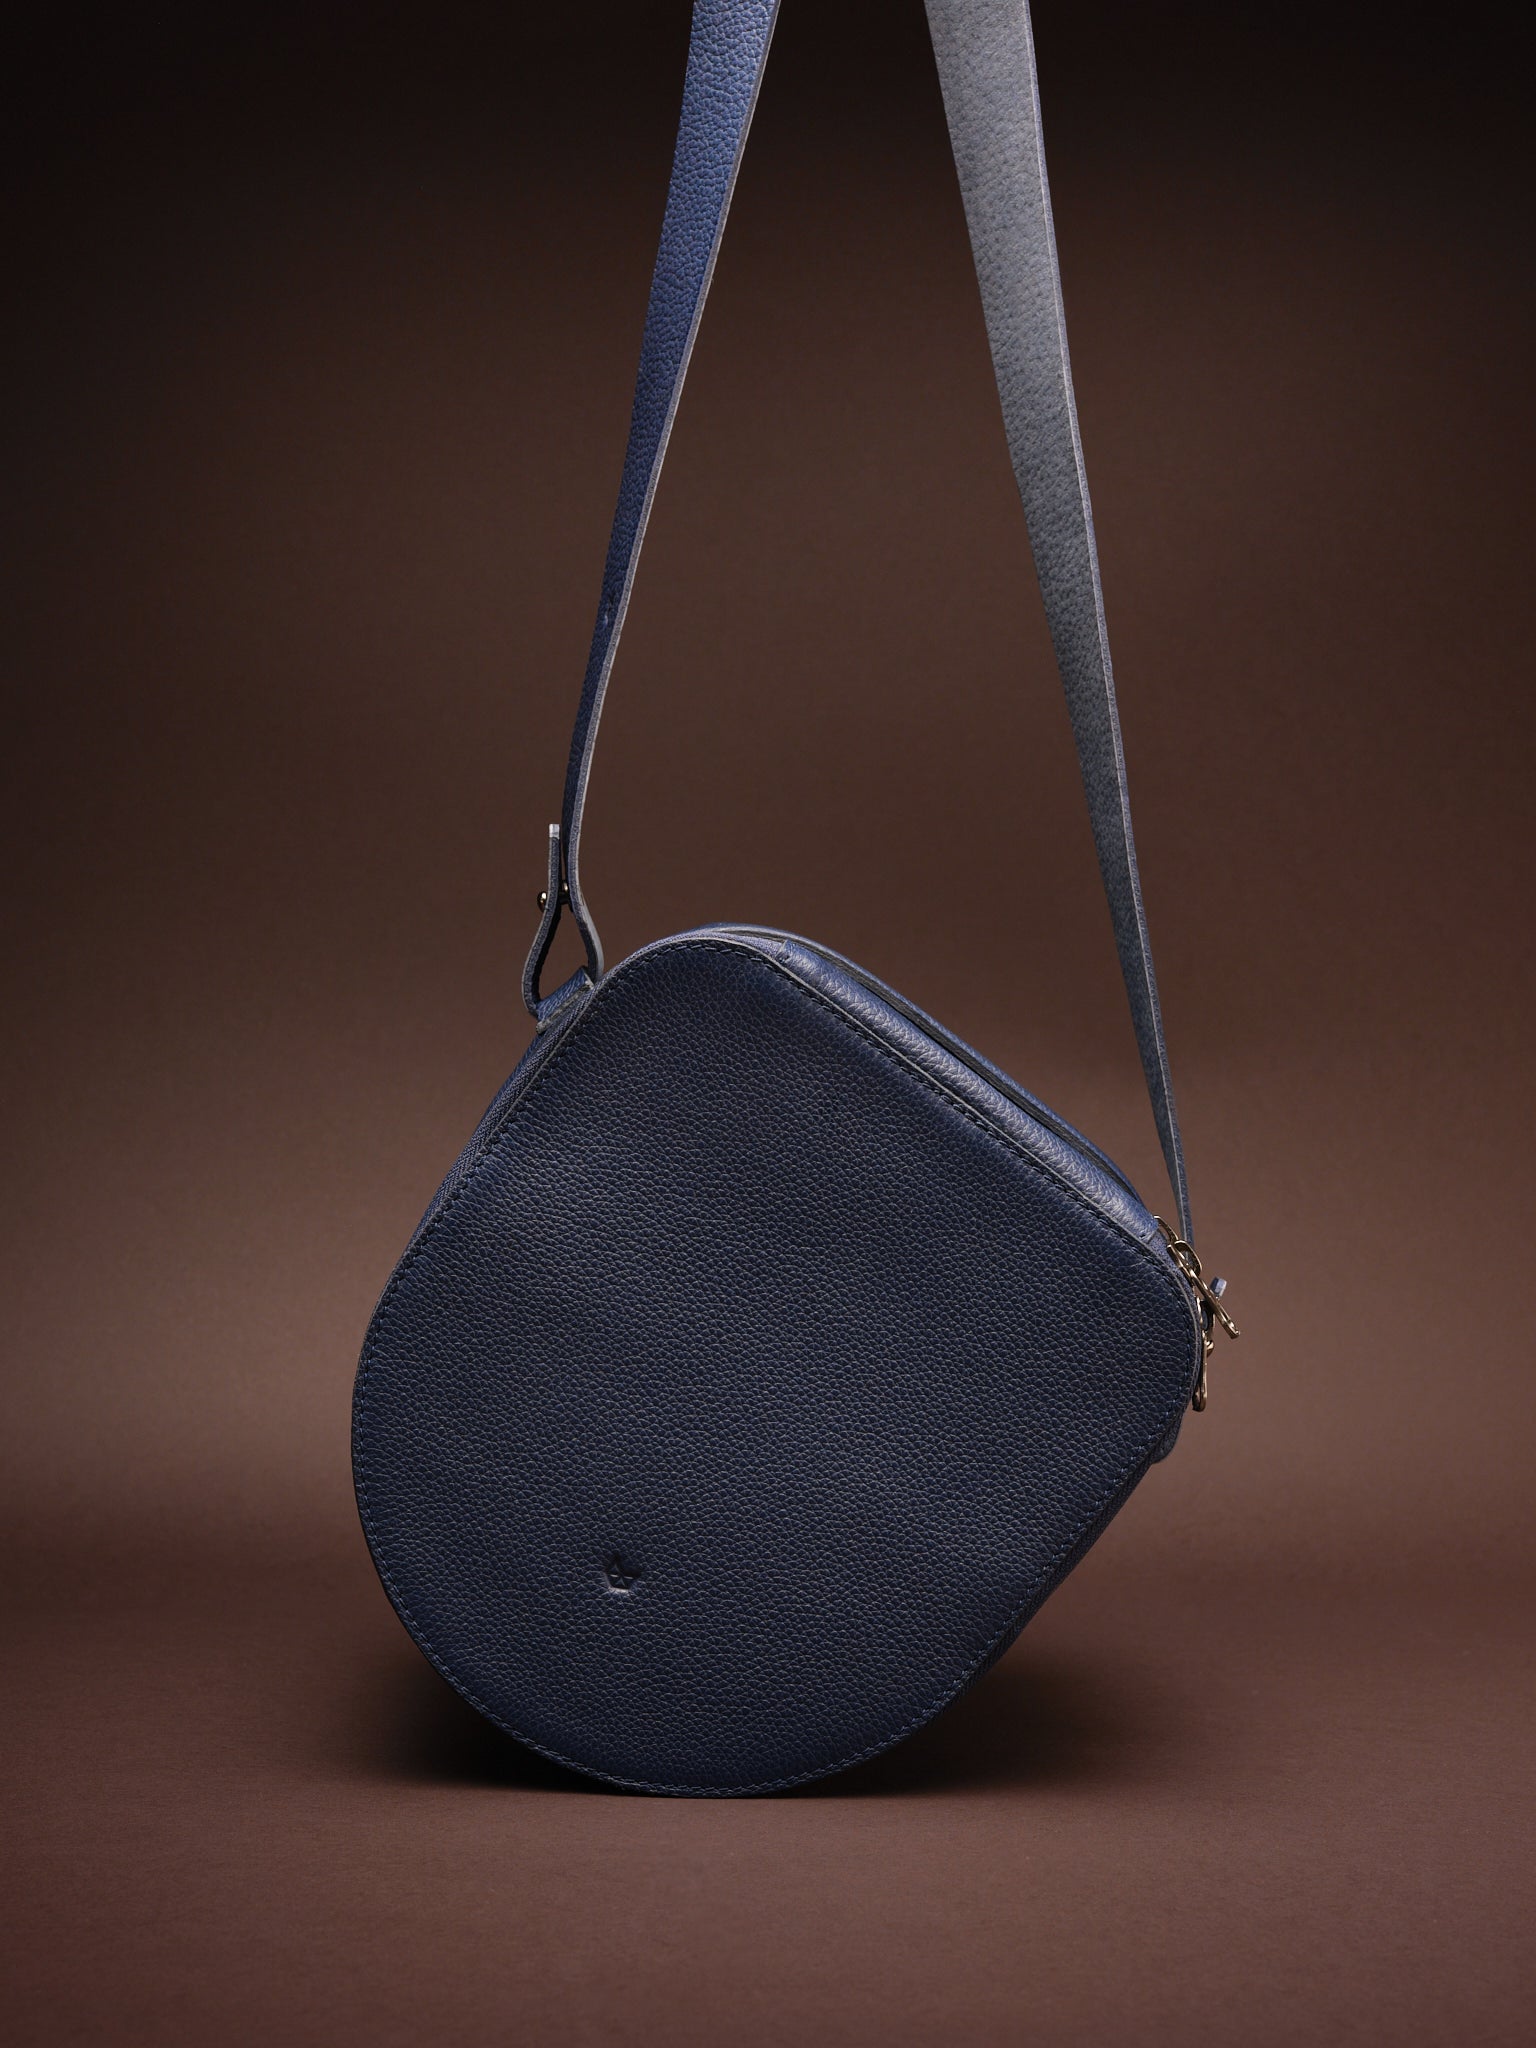 Removable Shoulder Strap. Apple Virtual Reality Headset. Carry Case Navy by Capra Leather